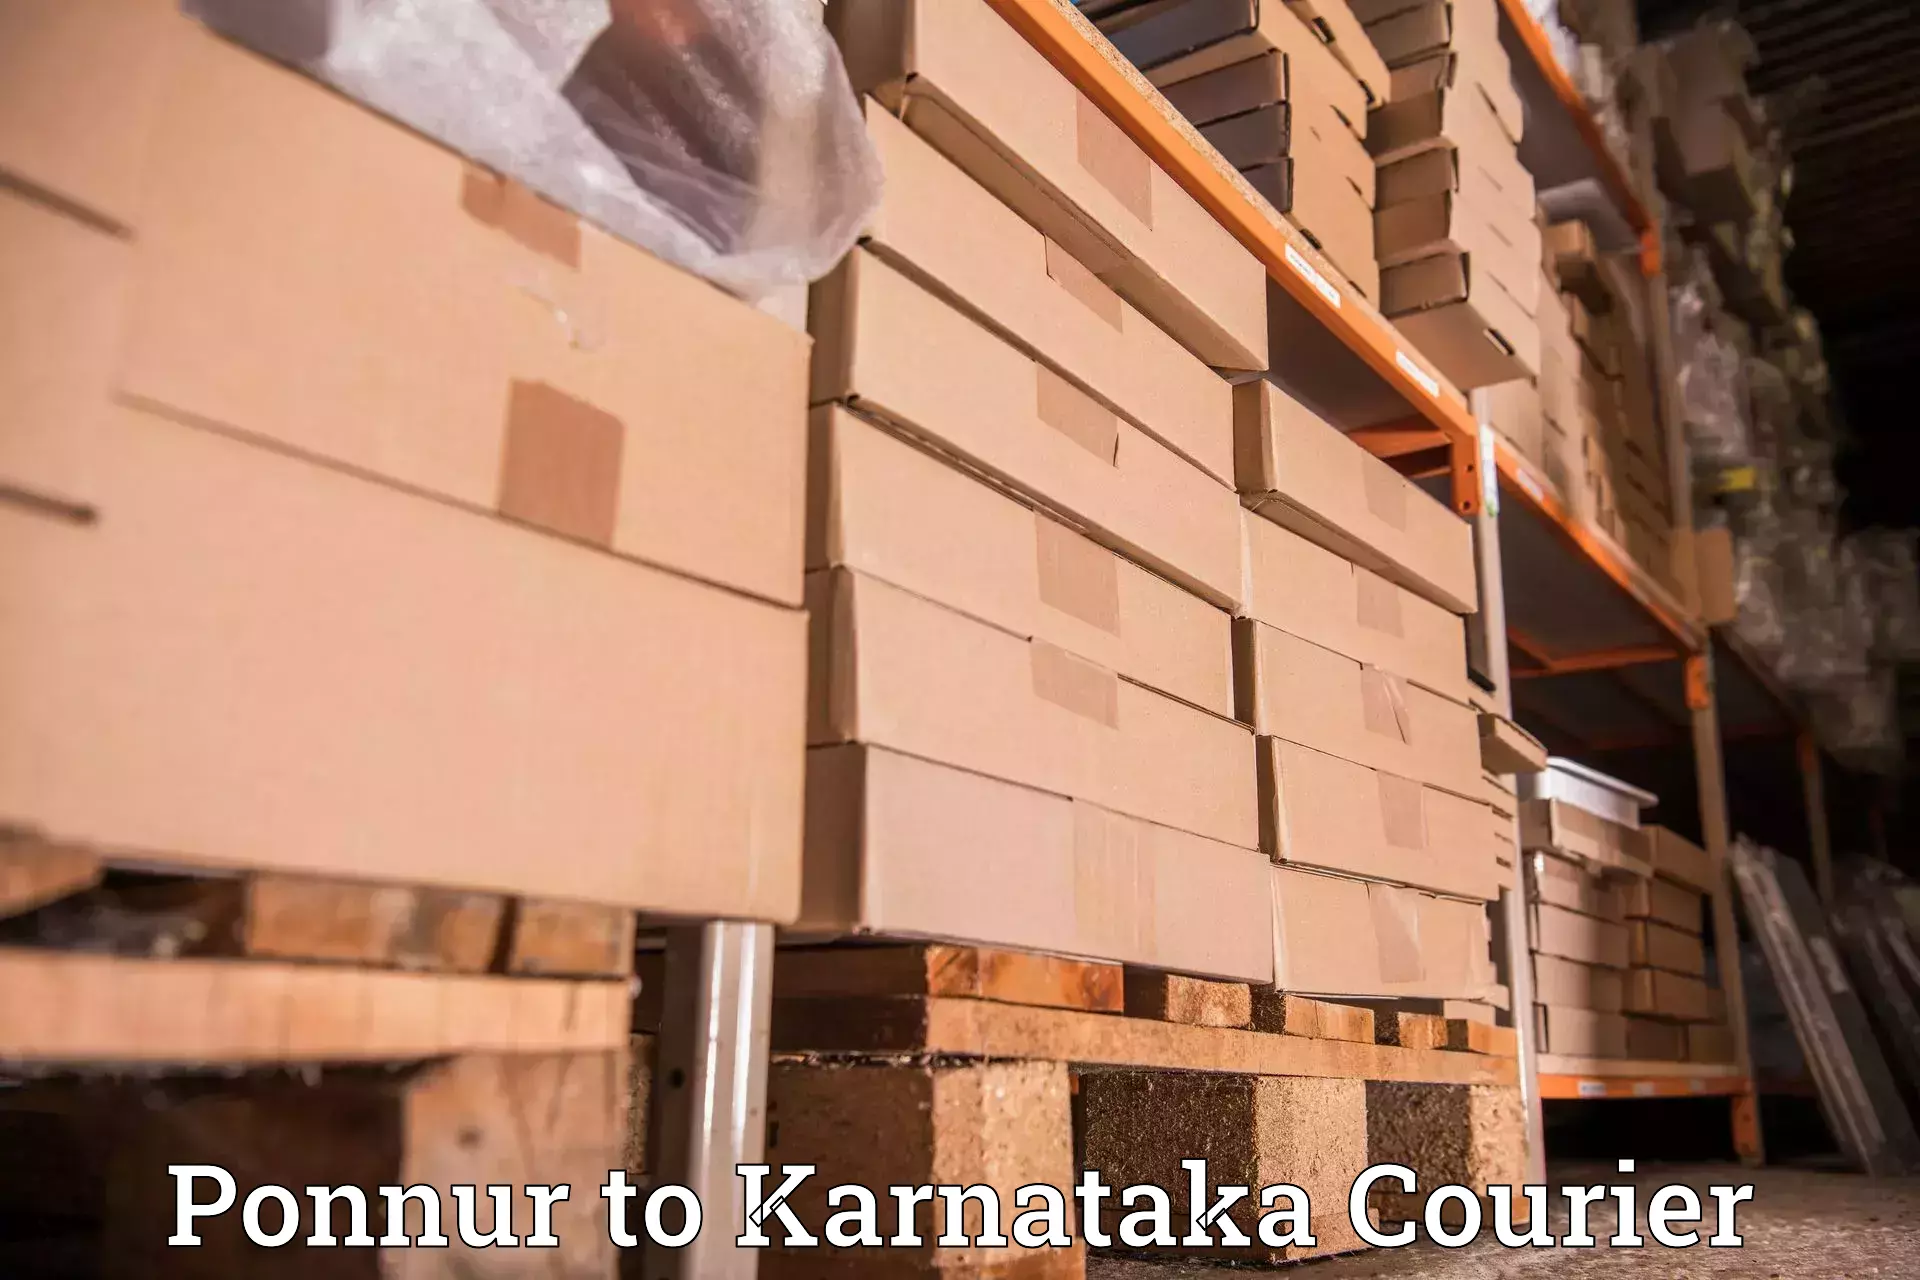 State-of-the-art courier technology Ponnur to Chikodi